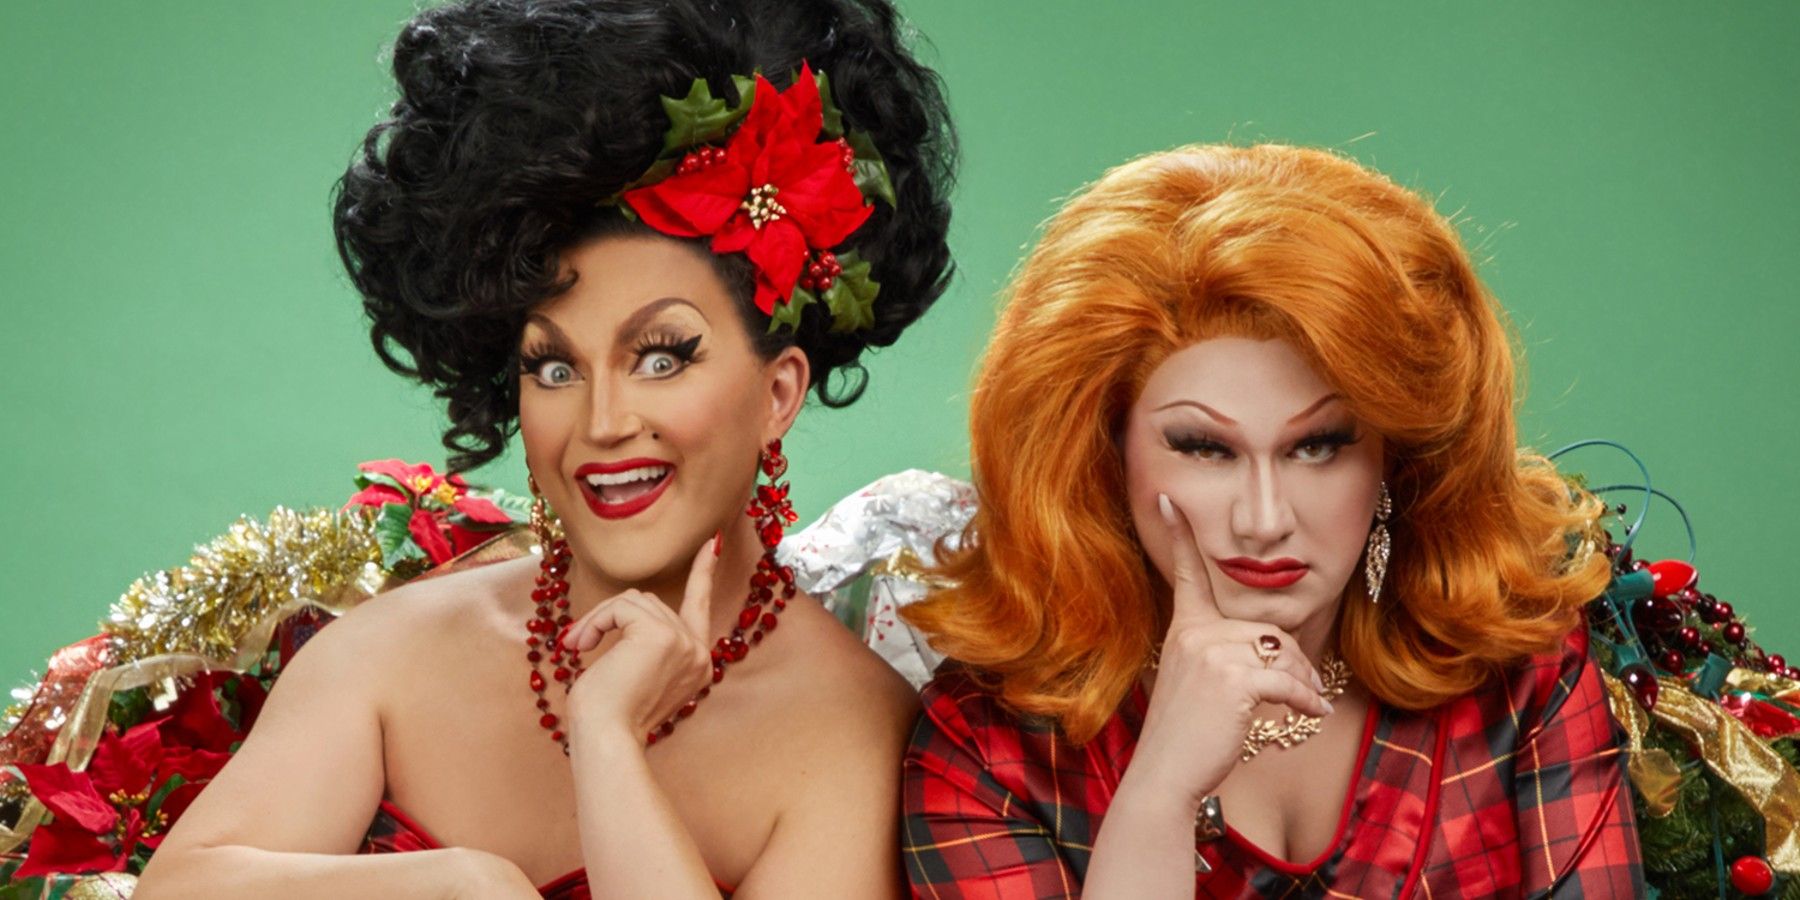 Jinkx and DeLa Holiday